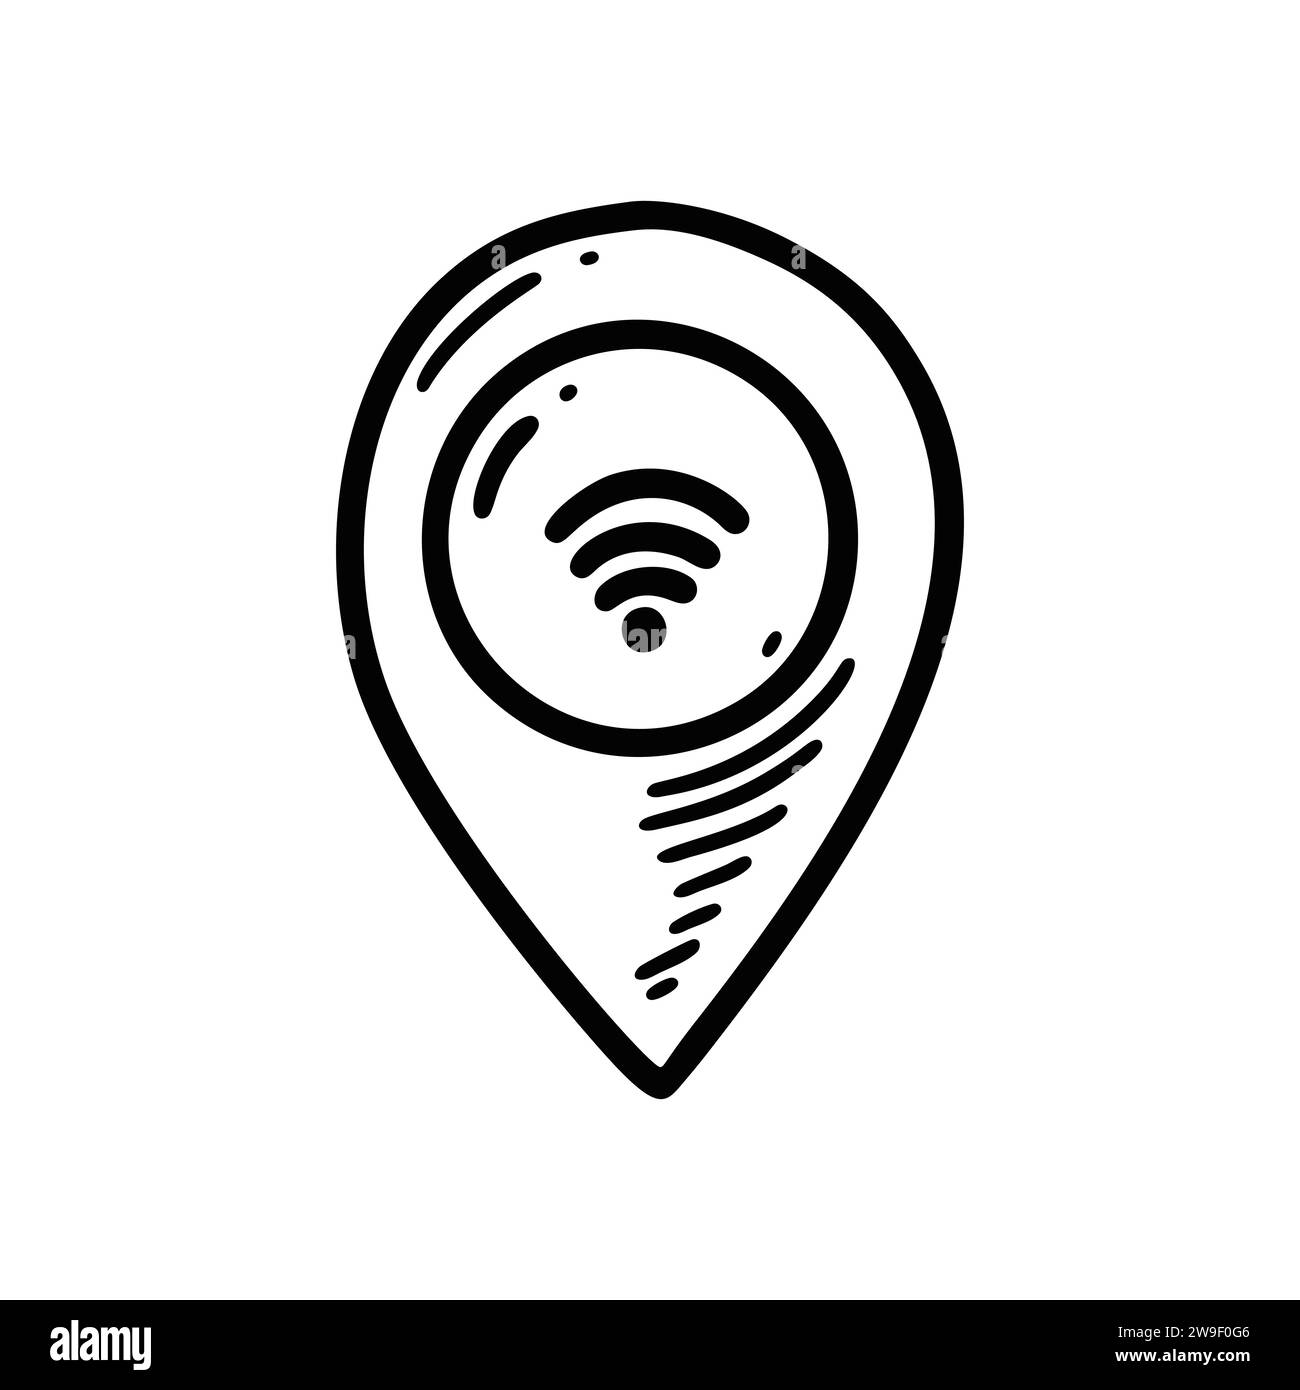 Doodle wifi location icon. Wireless satellite internet connection pinpoint. Sketch radio signal symbol. Hand drawn map pin. Stock Vector